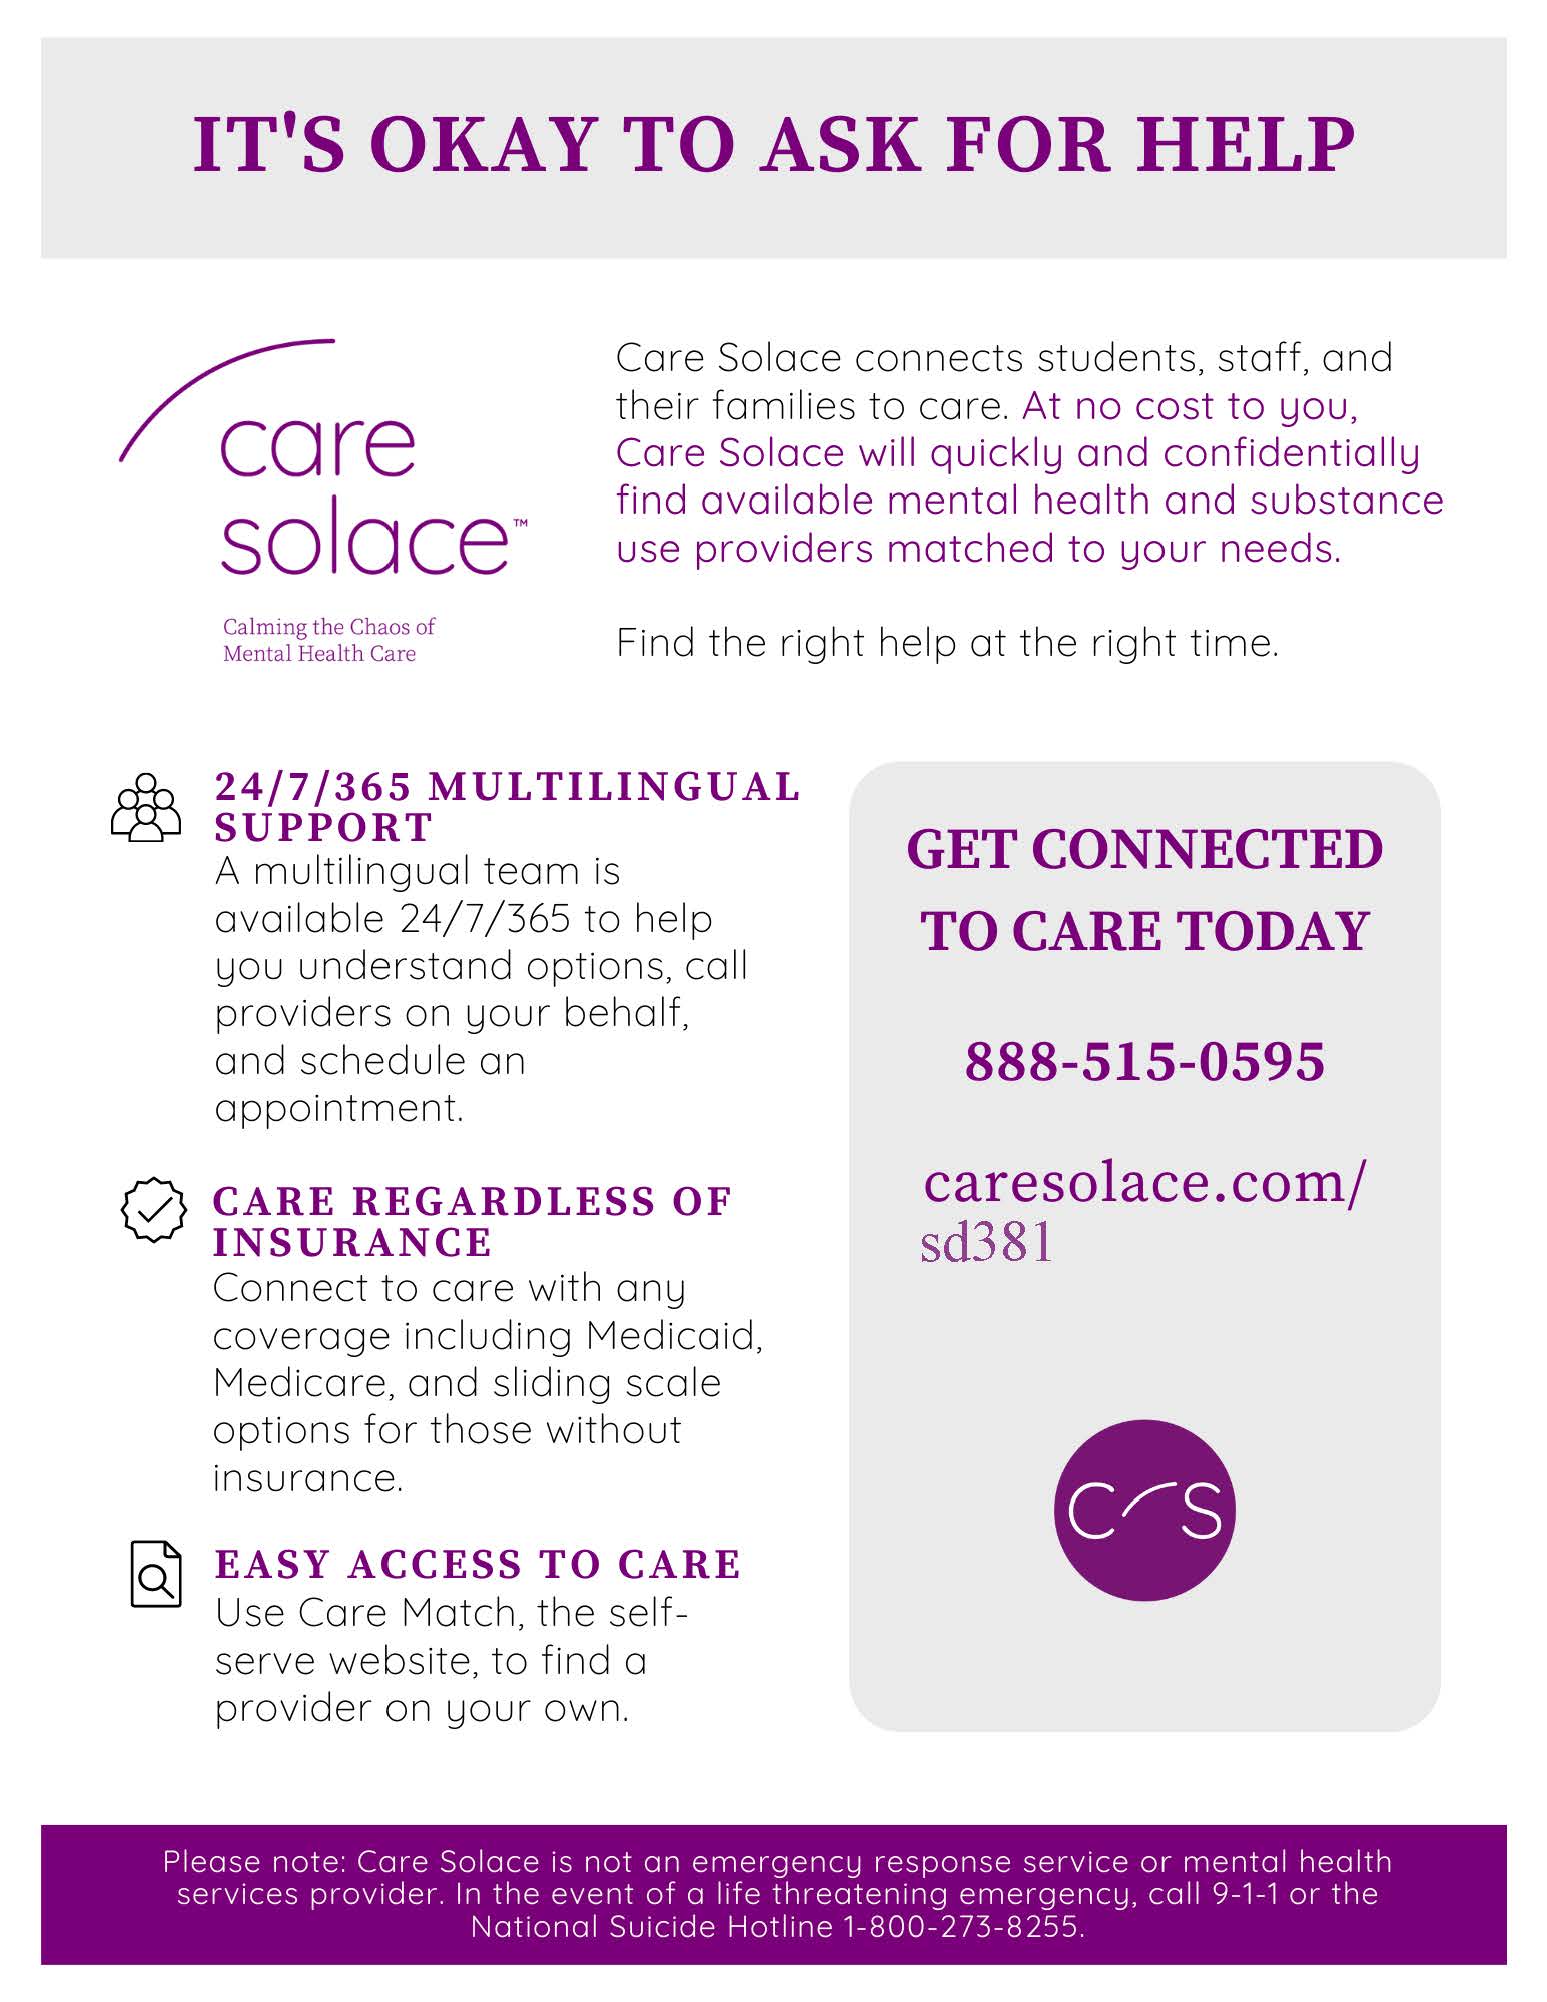 Care Solace Information